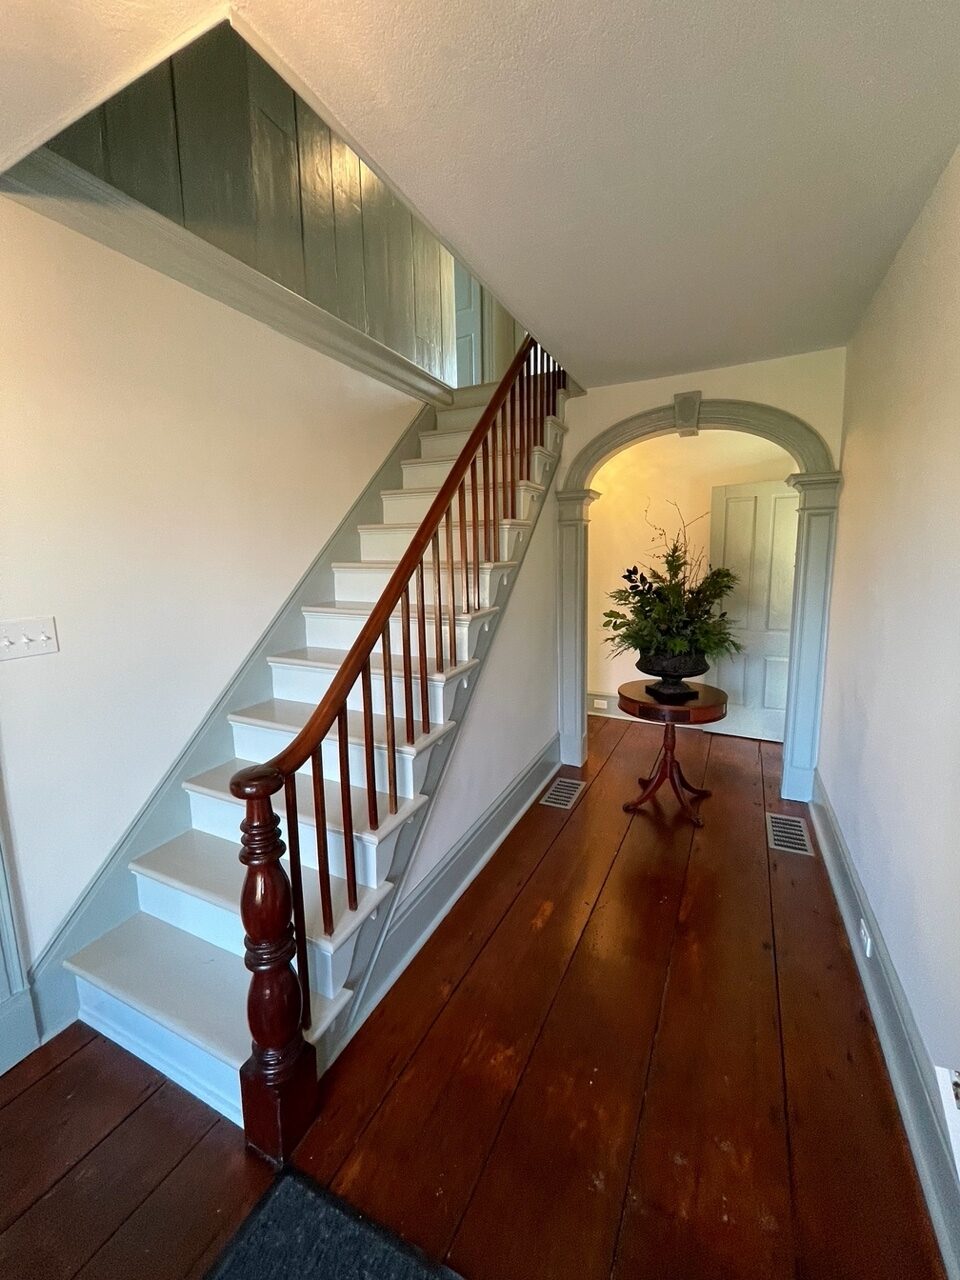 Center hall with wide-plank floors and original details on staircase and archway at rear in the Lt. Moses Case House.  ANNE SURCHIN